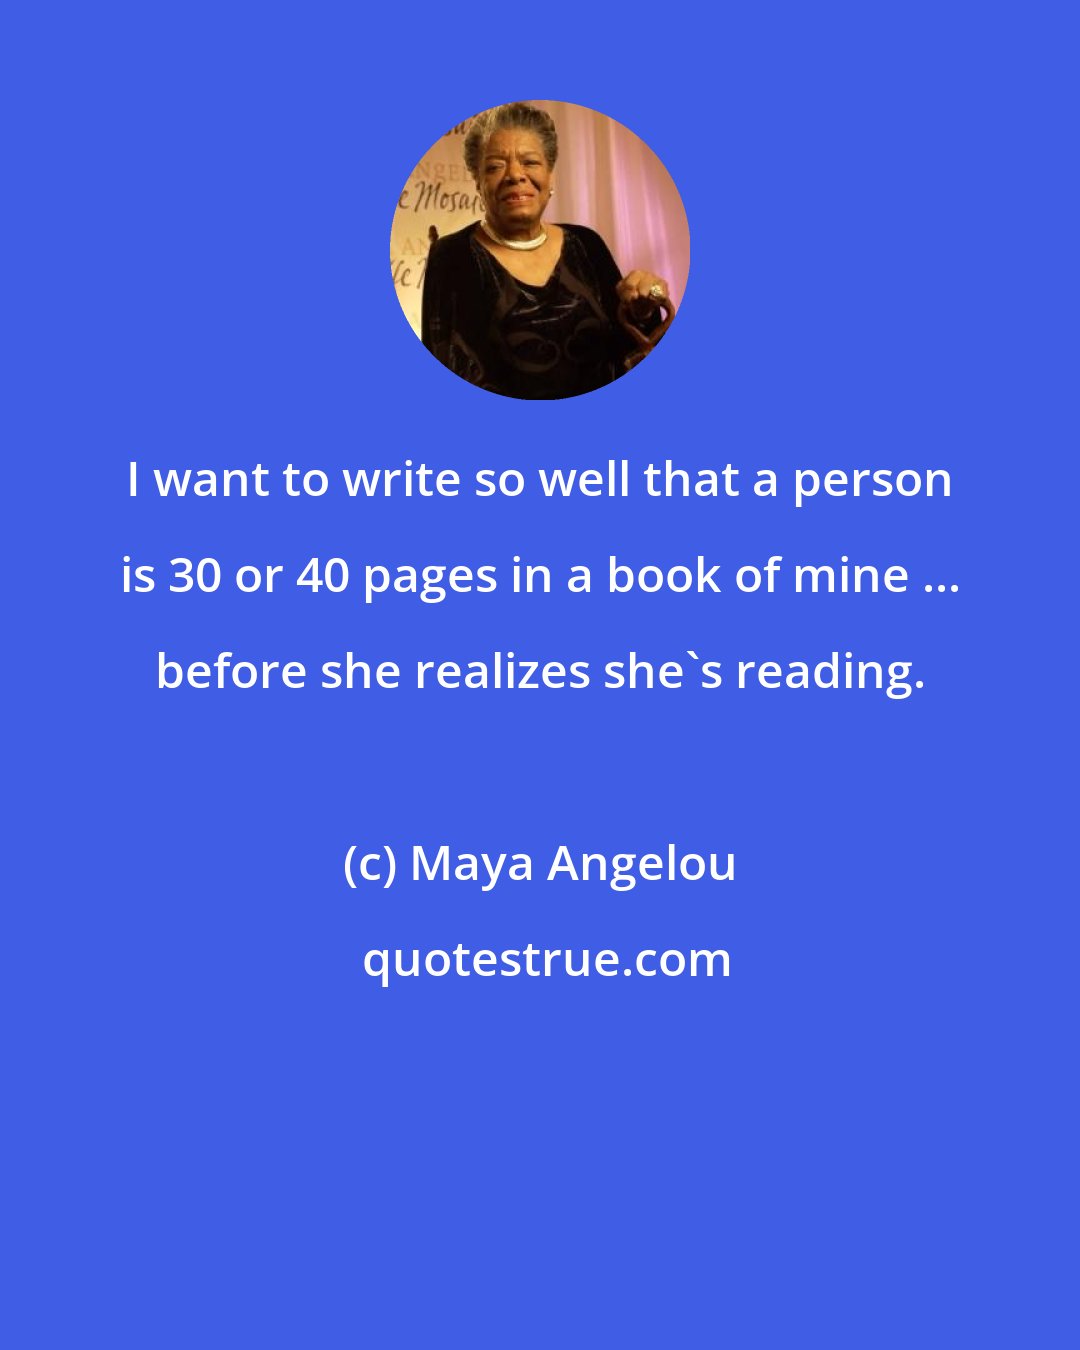 Maya Angelou: I want to write so well that a person is 30 or 40 pages in a book of mine ... before she realizes she's reading.